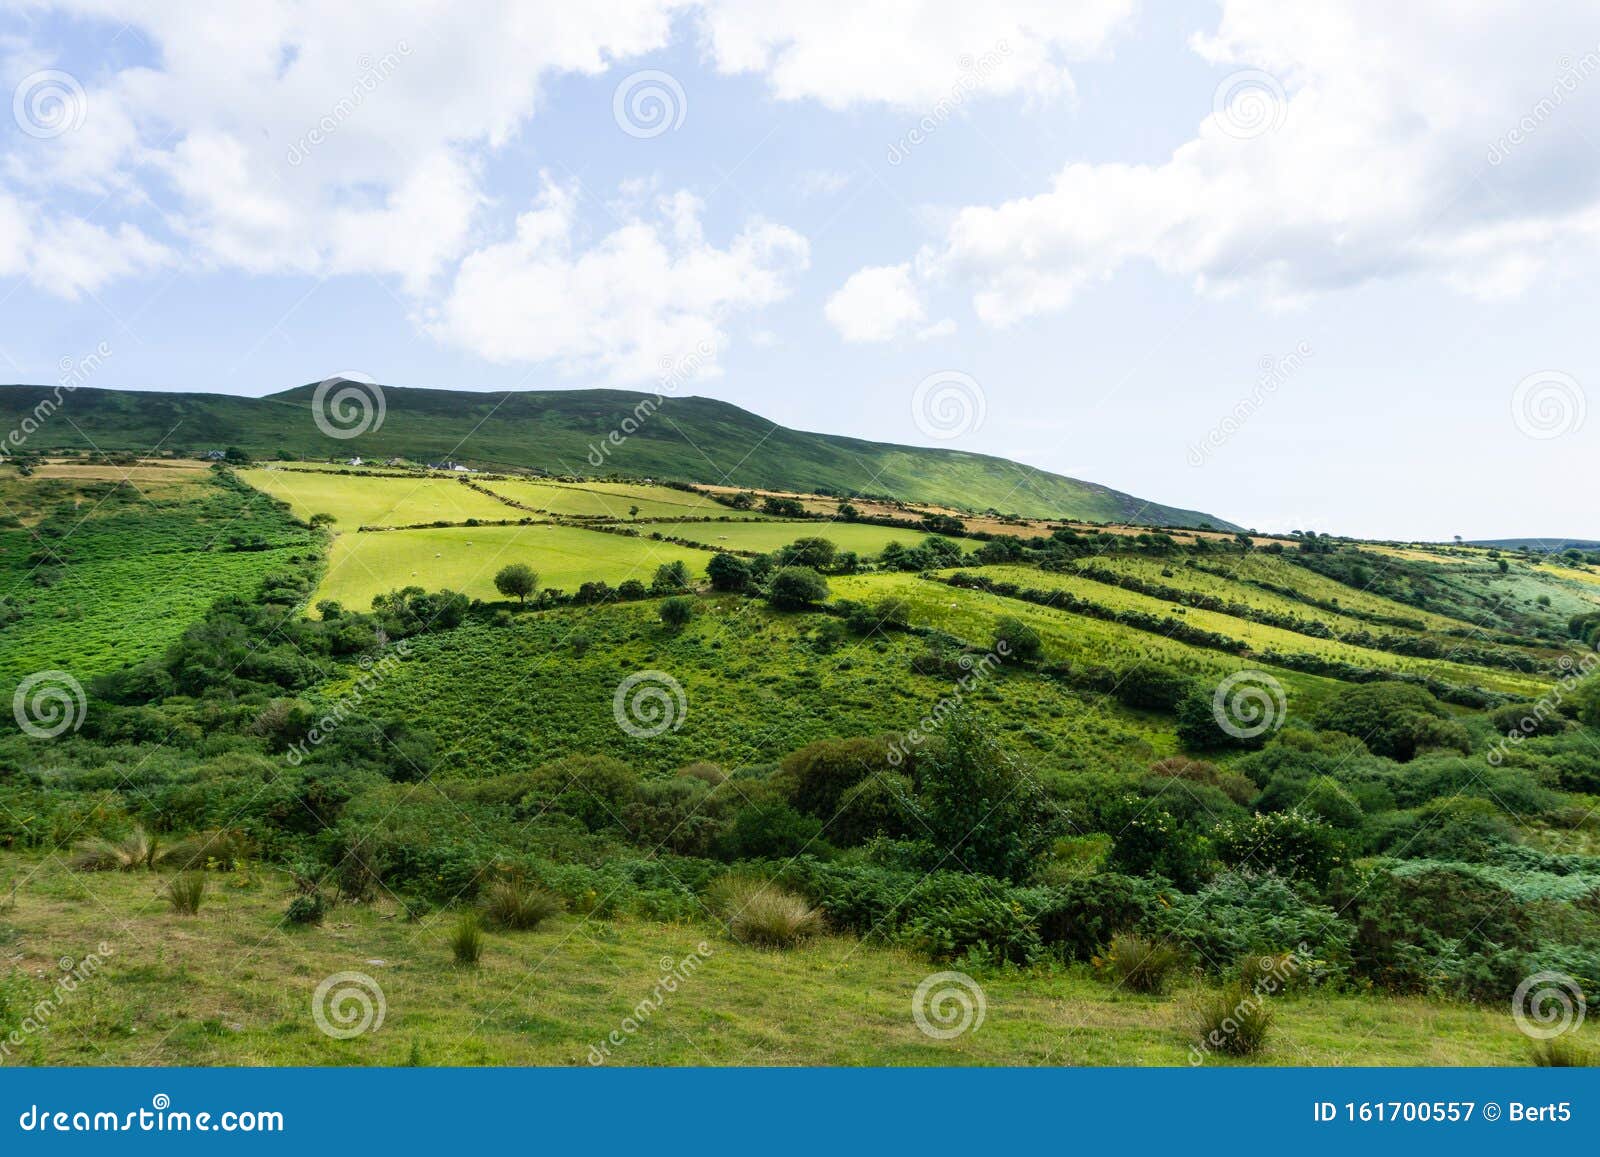 Green Irish Landscape With Hills Stock Image Image Of Country European 161700557